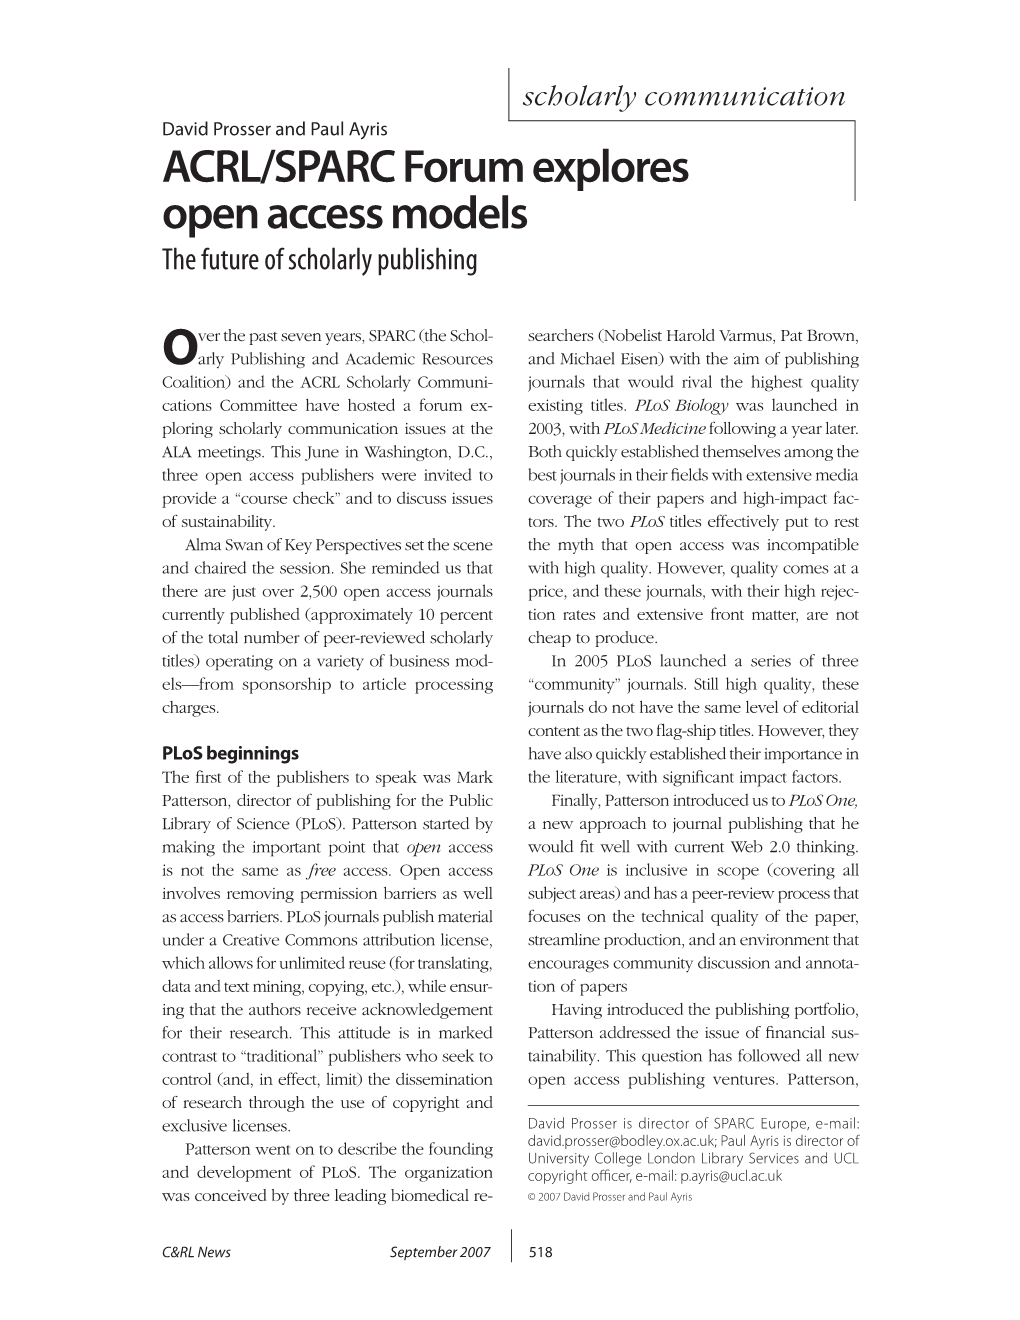 ACRL/SPARC Forum Explores Open Access Models the Future of Scholarly Publishing